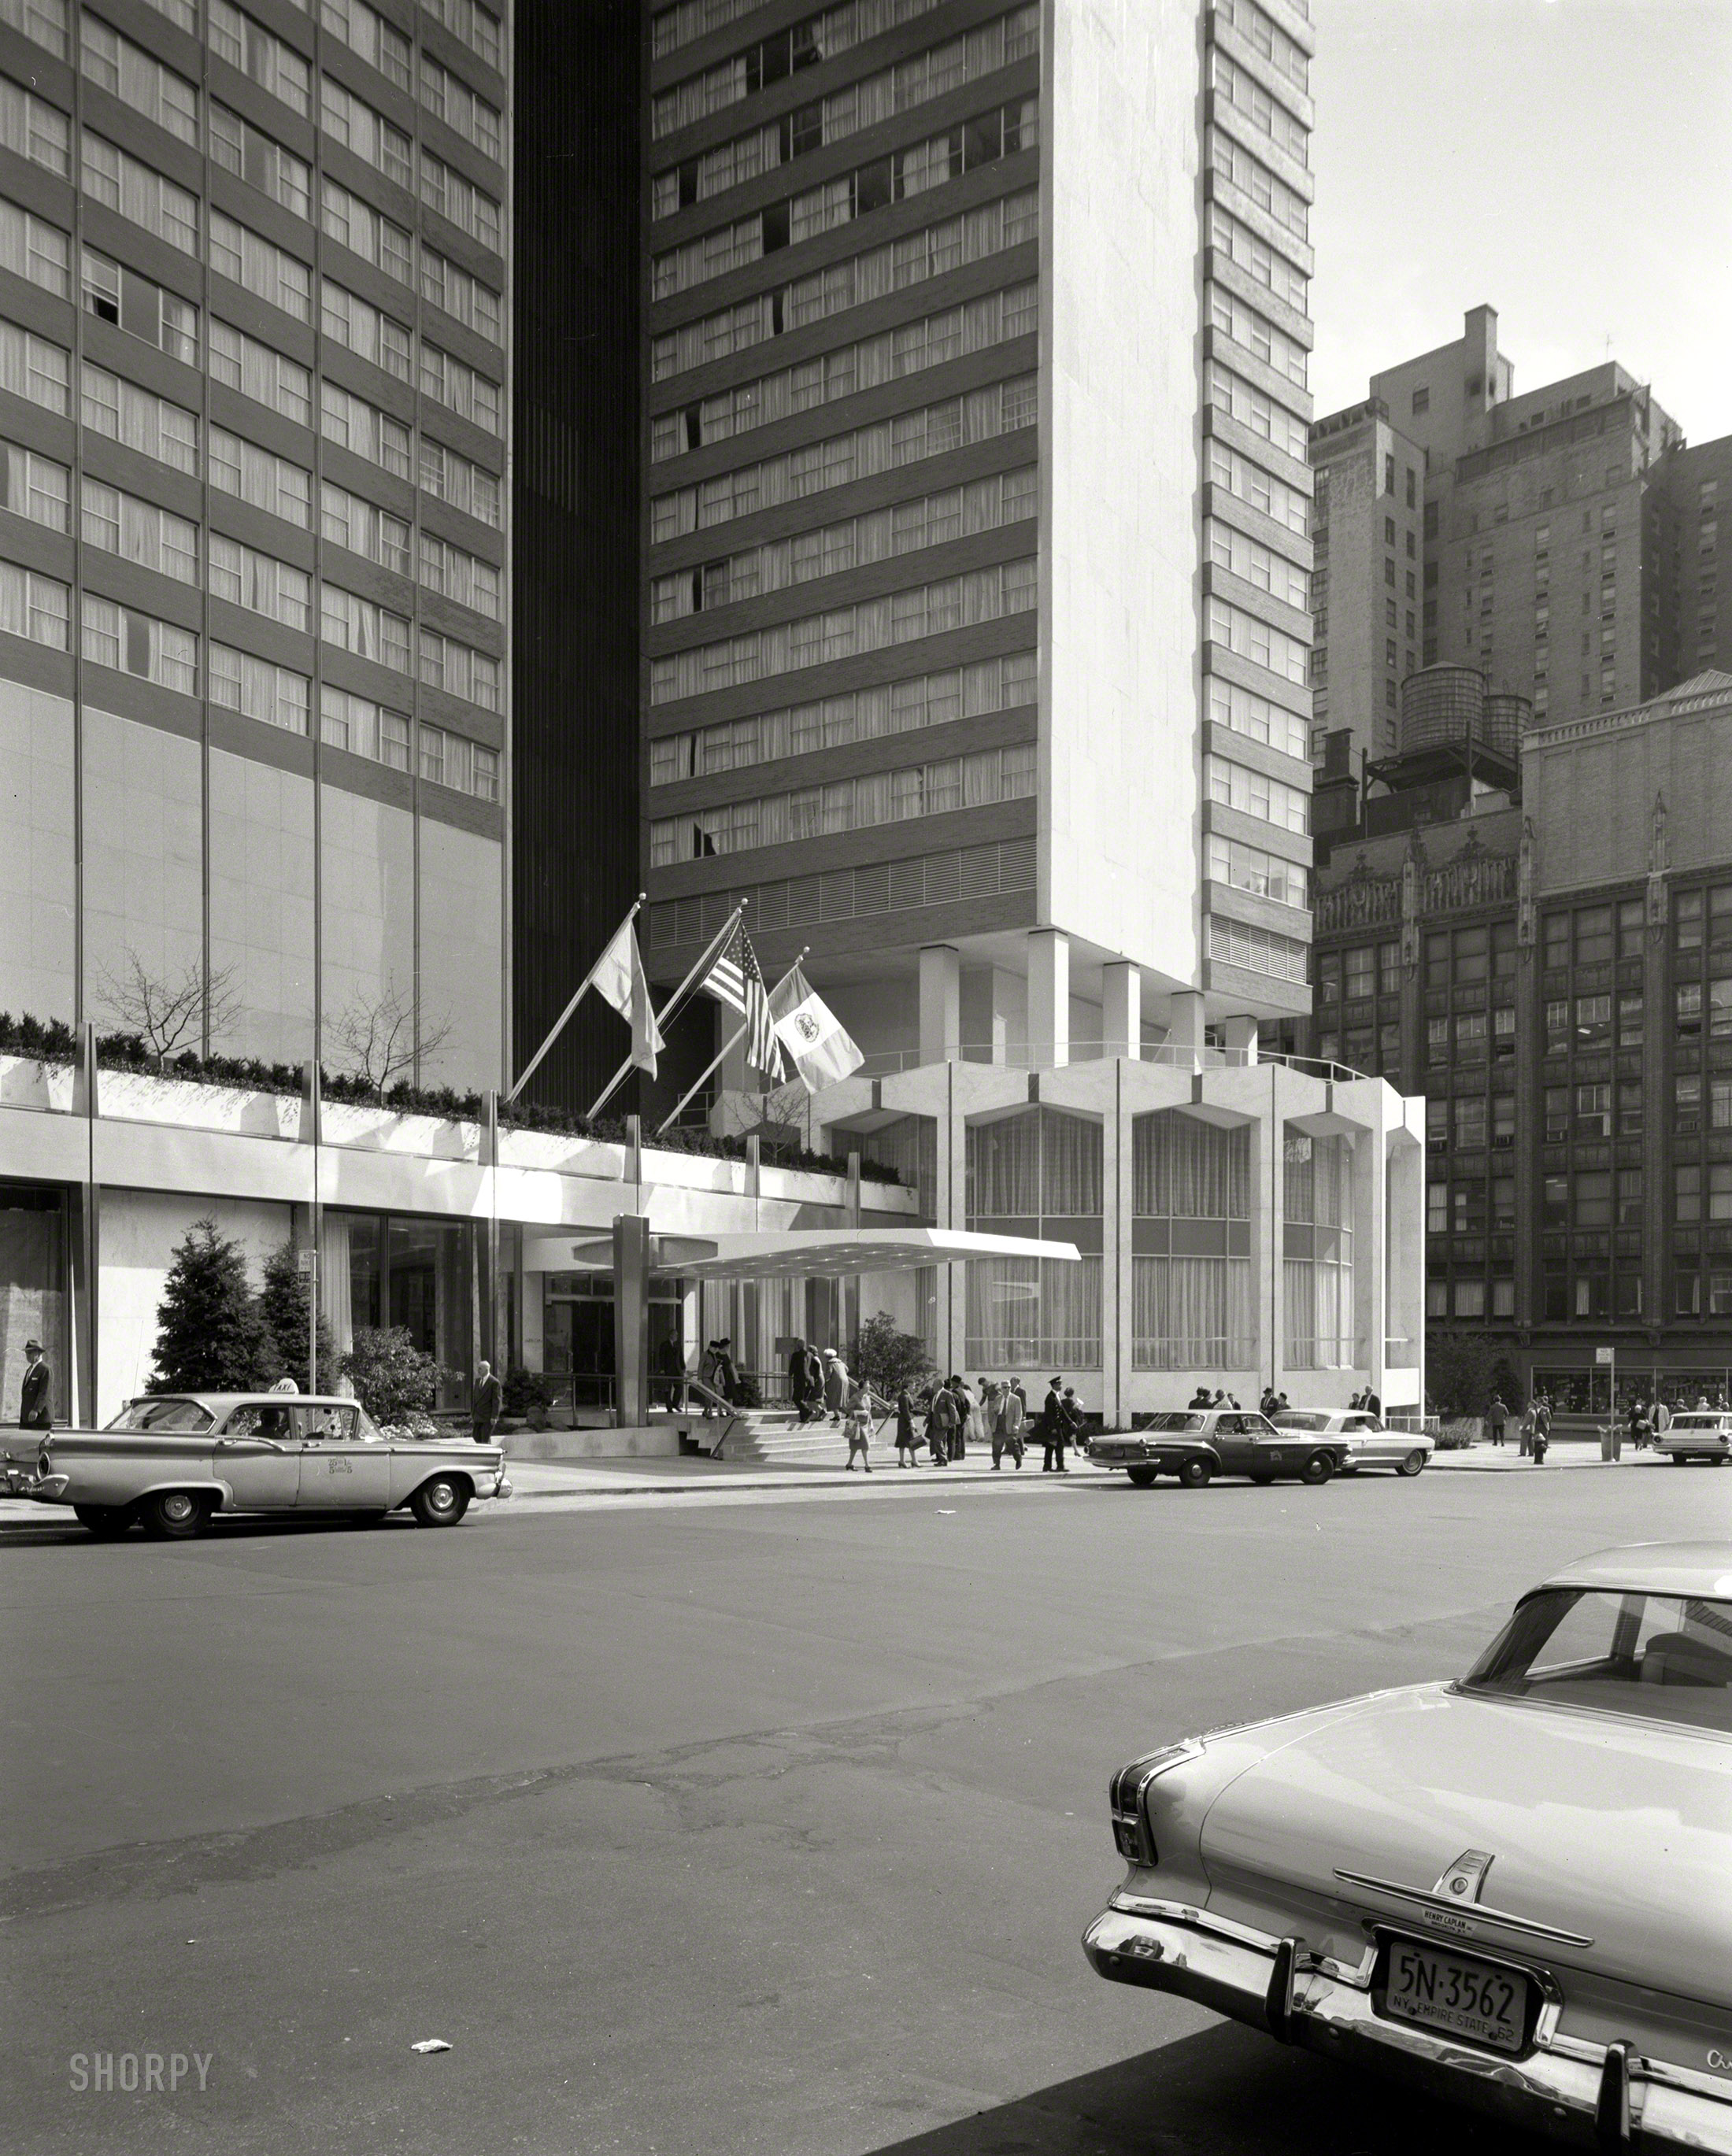 Oct. 1, 1962. "Americana Hotel, 52nd Street and Seventh Avenue, New York City. Entrance section from left. Loew's Hotels, client. Morris Lapidus, Harle & Liebman, architects." We saw the coffee shop a few weeks ago. Large-format acetate negative by Gottscho-Schleisner. View full size.